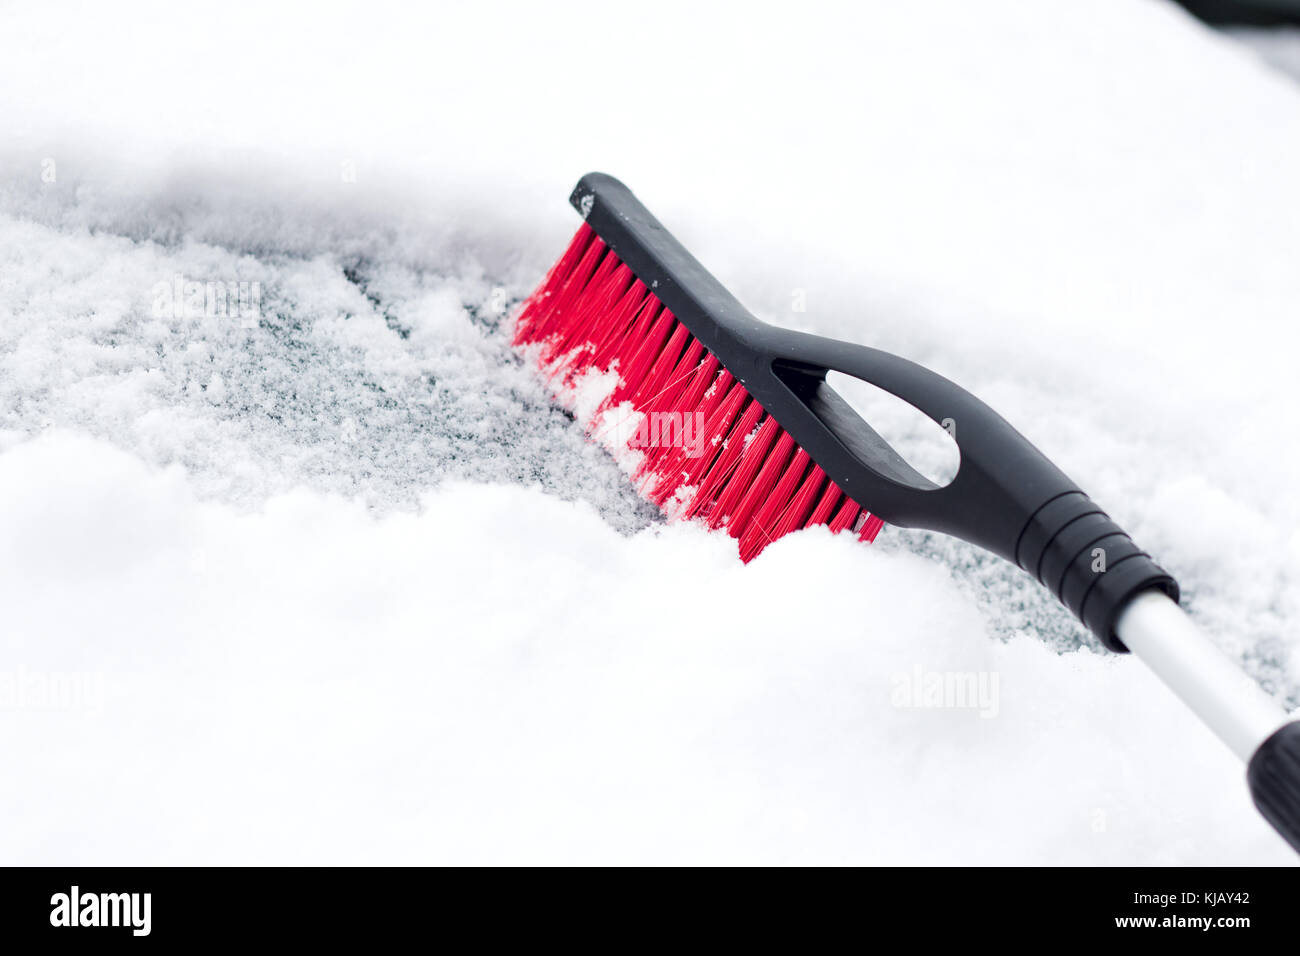 https://c8.alamy.com/comp/KJAY42/transportation-winter-weather-people-and-vehicle-concept-man-cleaning-KJAY42.jpg